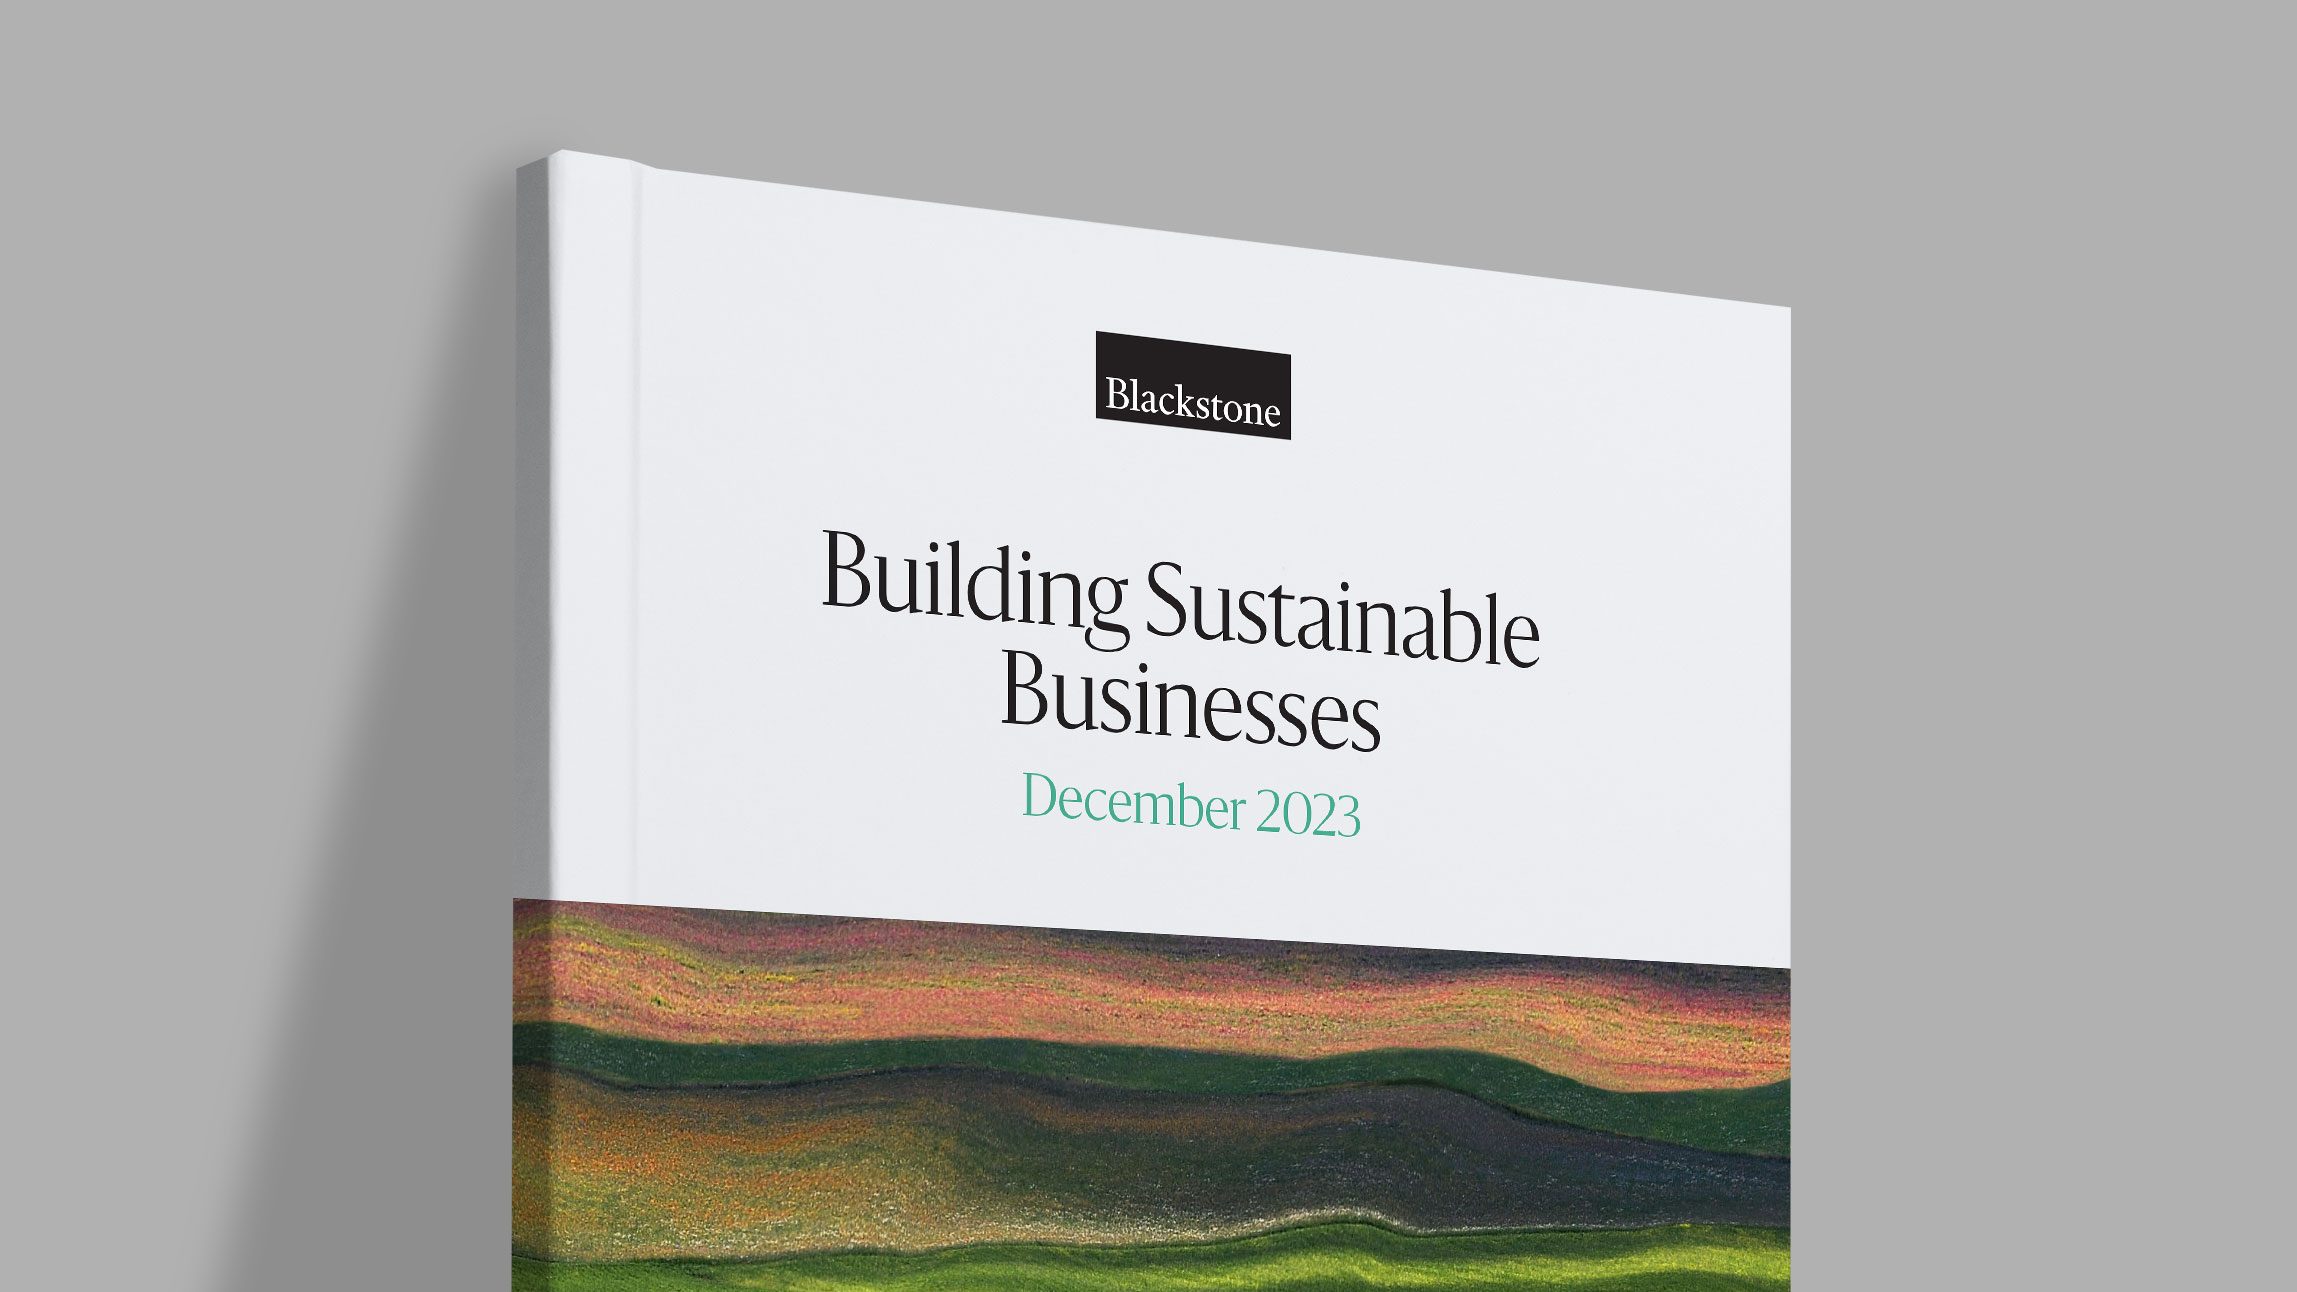 Cover of Blackstone's "Building Sustainable Businesses" report, 2023